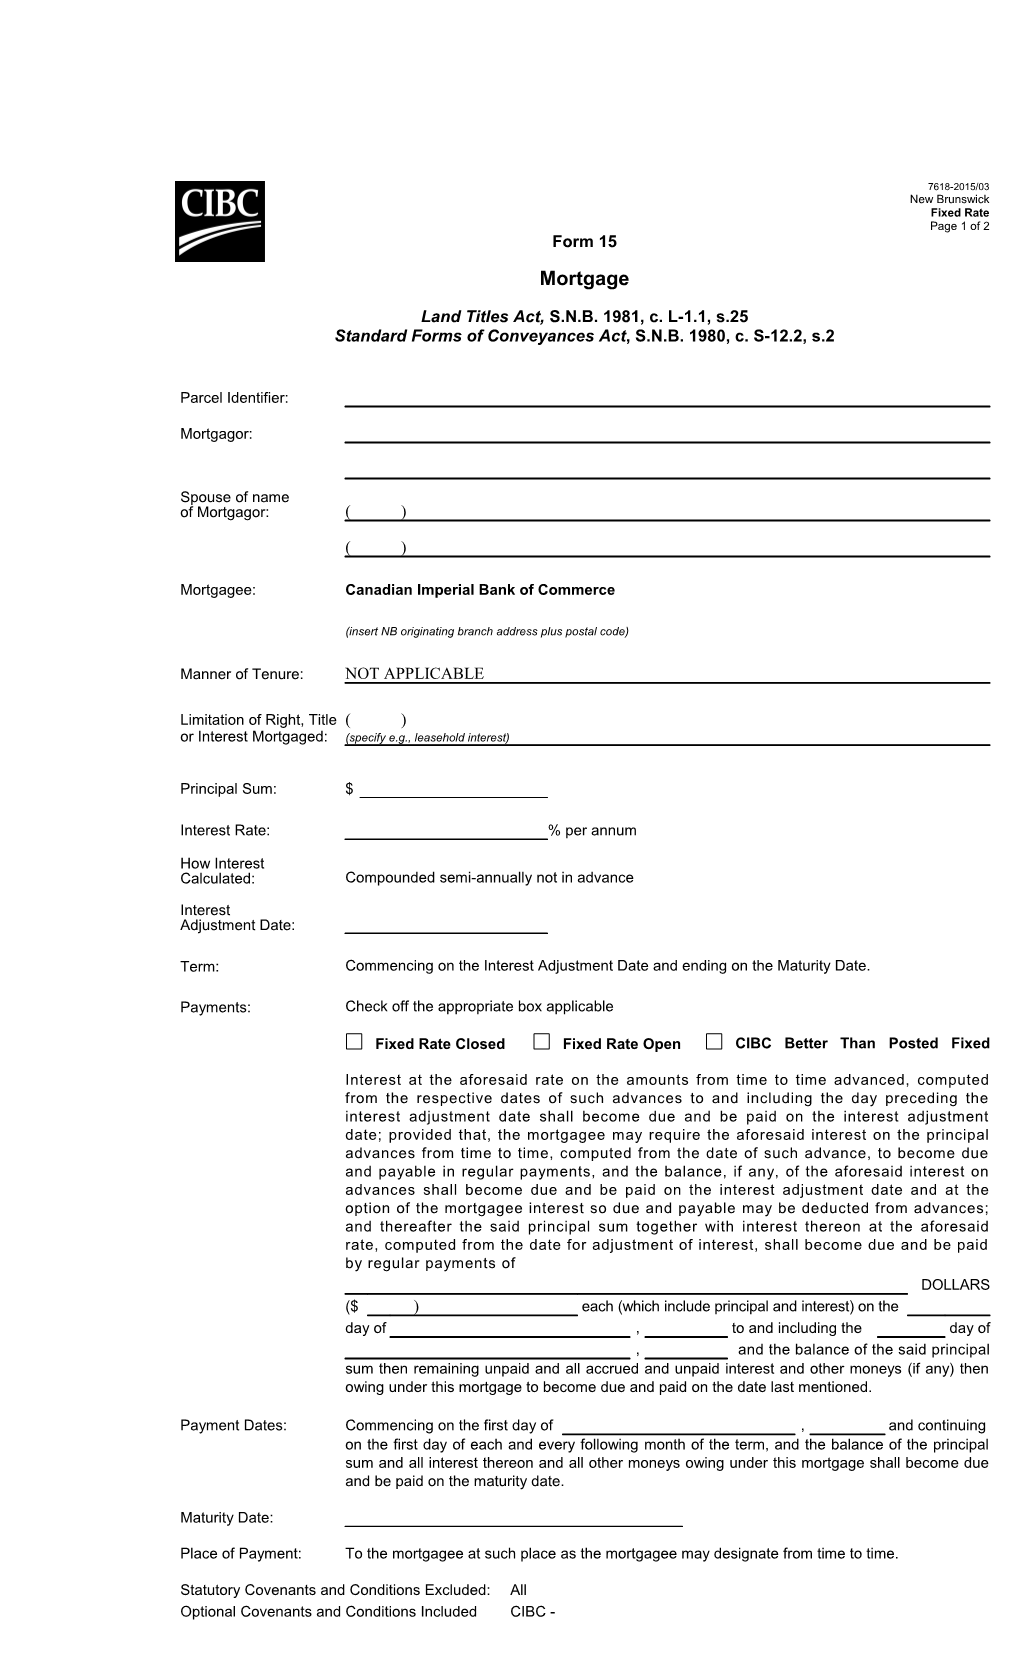 Mortgage - Form 15 - Fixed Rate (7618 New Brunswick-2015/03)